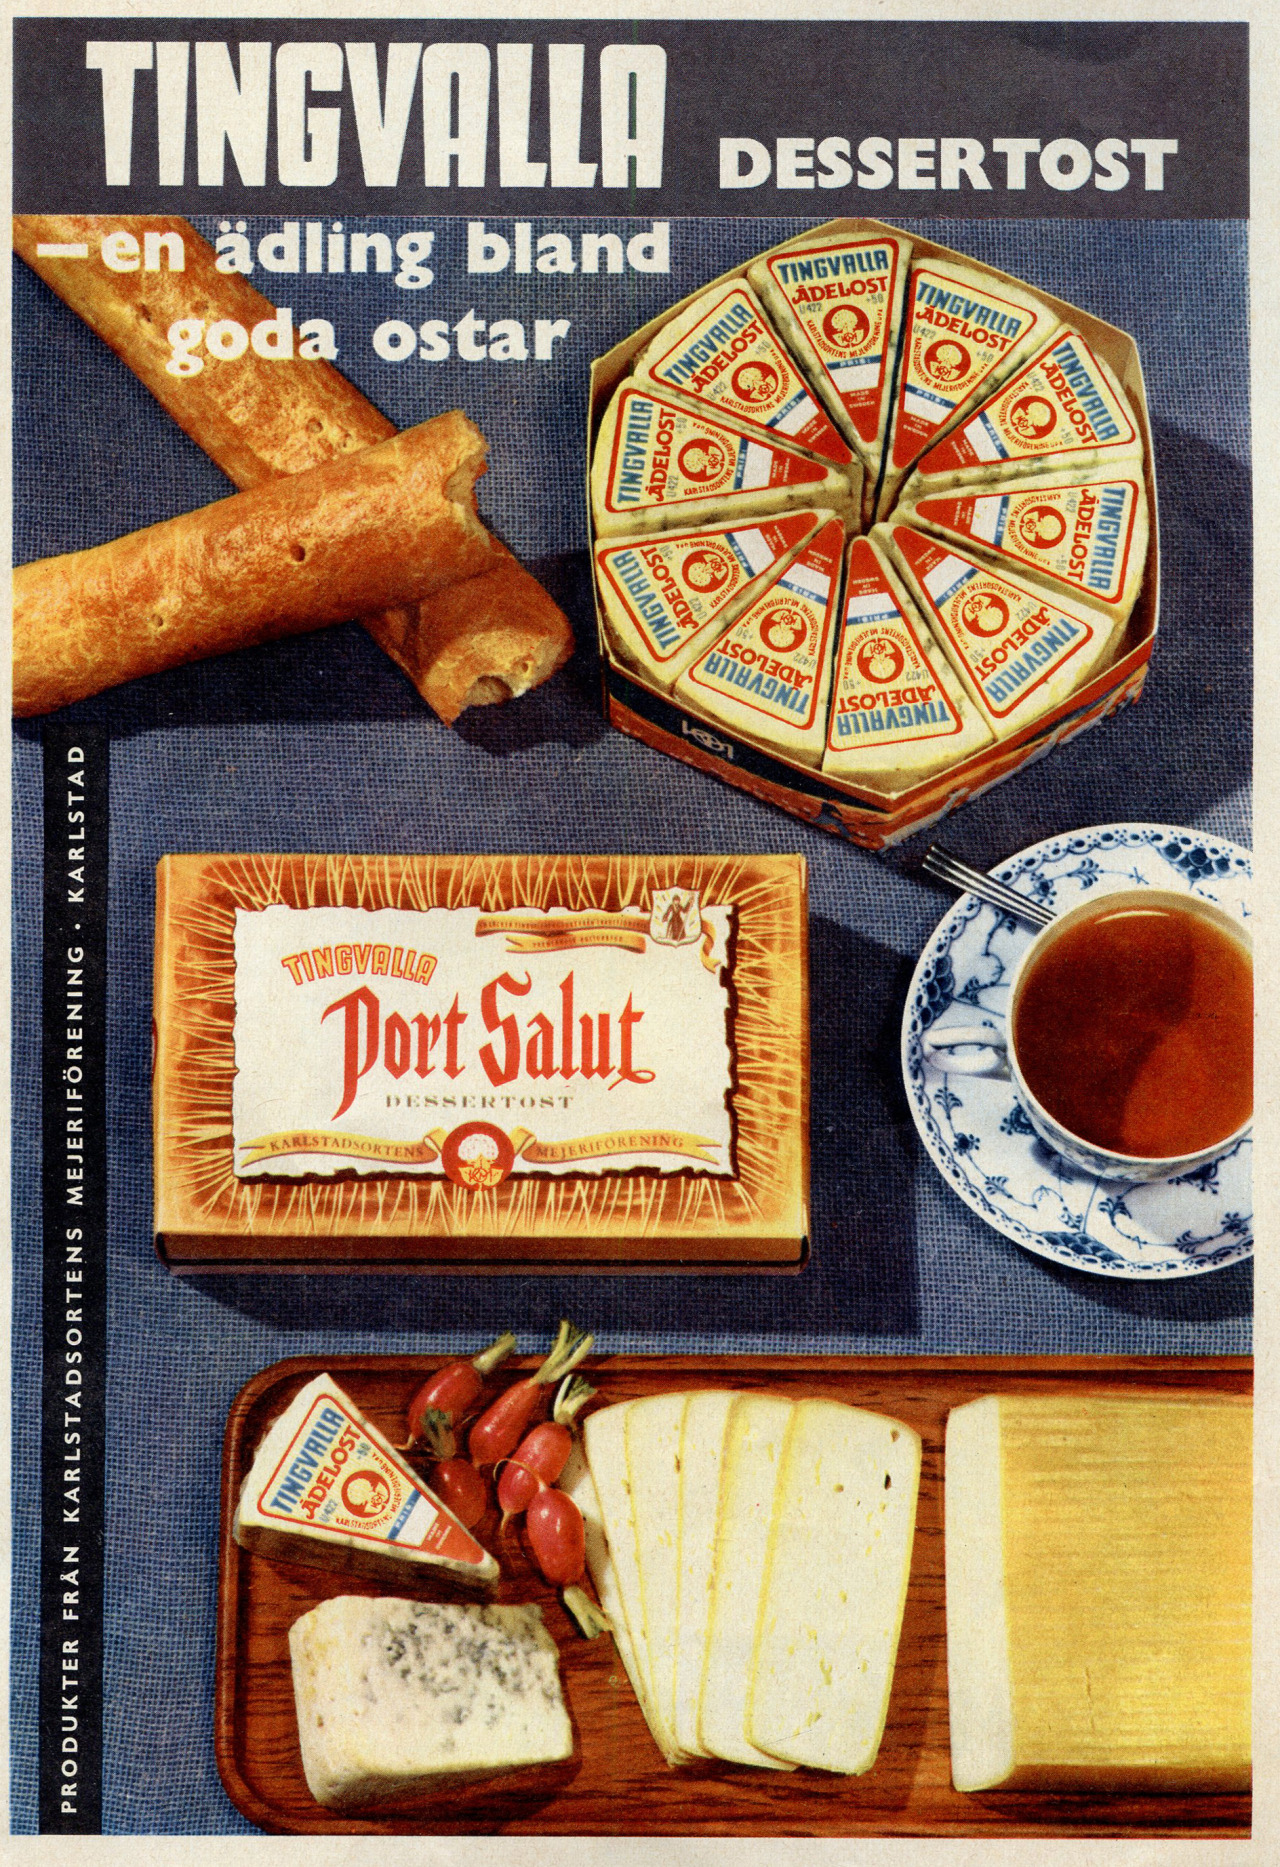 Dessert cheese? I’ll stick with Hostess Havarti Ding Dongs.Femina (Swedish womans magazine)   May, 7th 1959 #vintage ad#vintage ads#advertising#advertisment#cheese#desserts#1959#1950s#1950s ad#1950s#1950s ad#swedish ad#swedish#sweden#funny#humor#humour